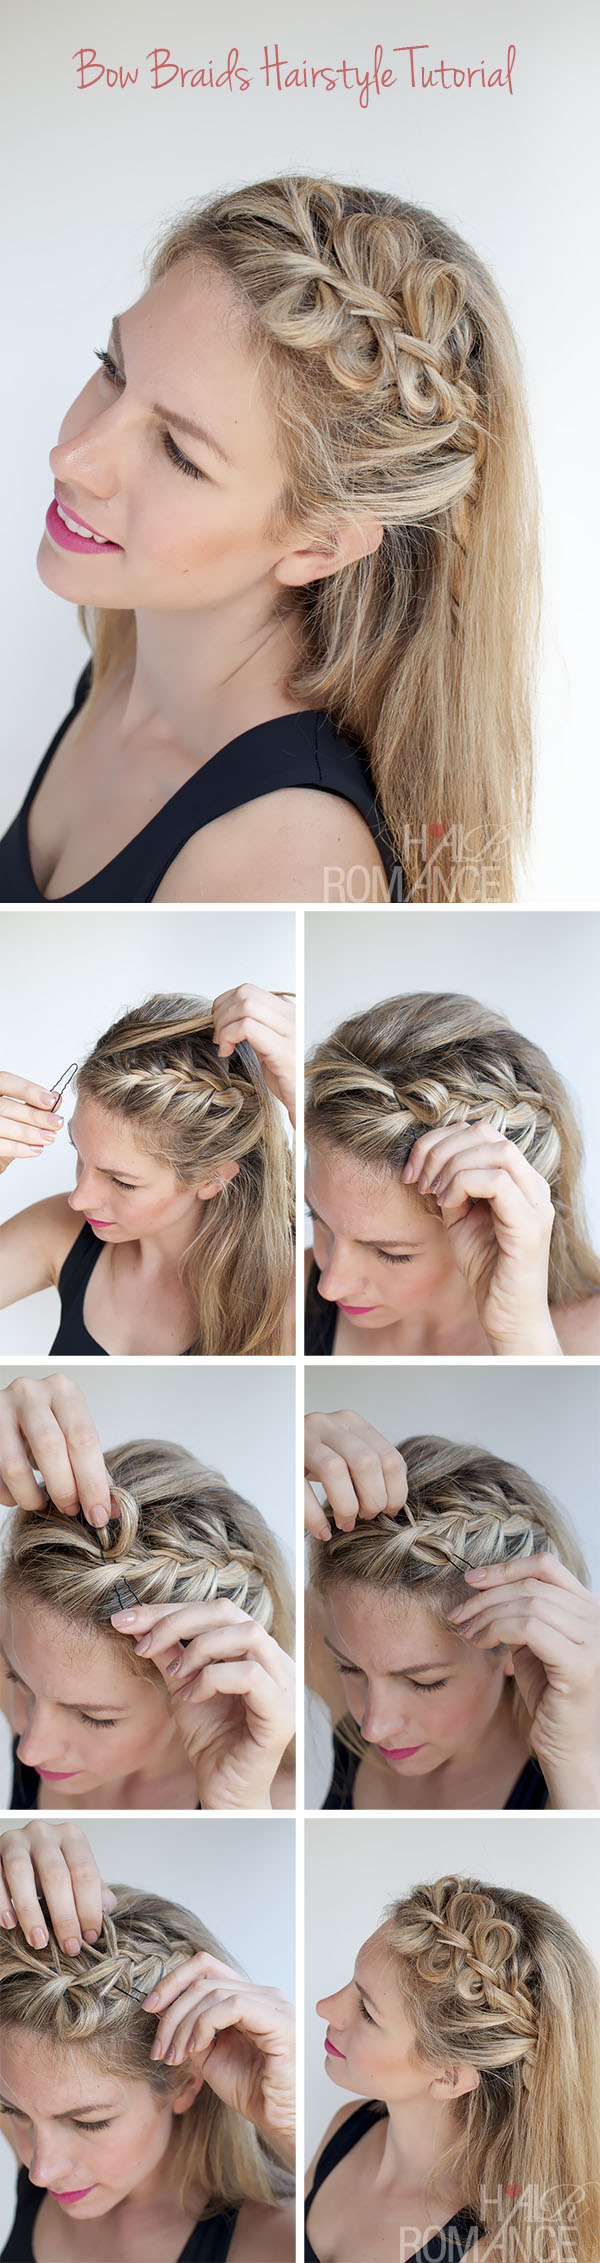 Hair-Romance-Bow-braids-hairstyle-tutorial-how-to